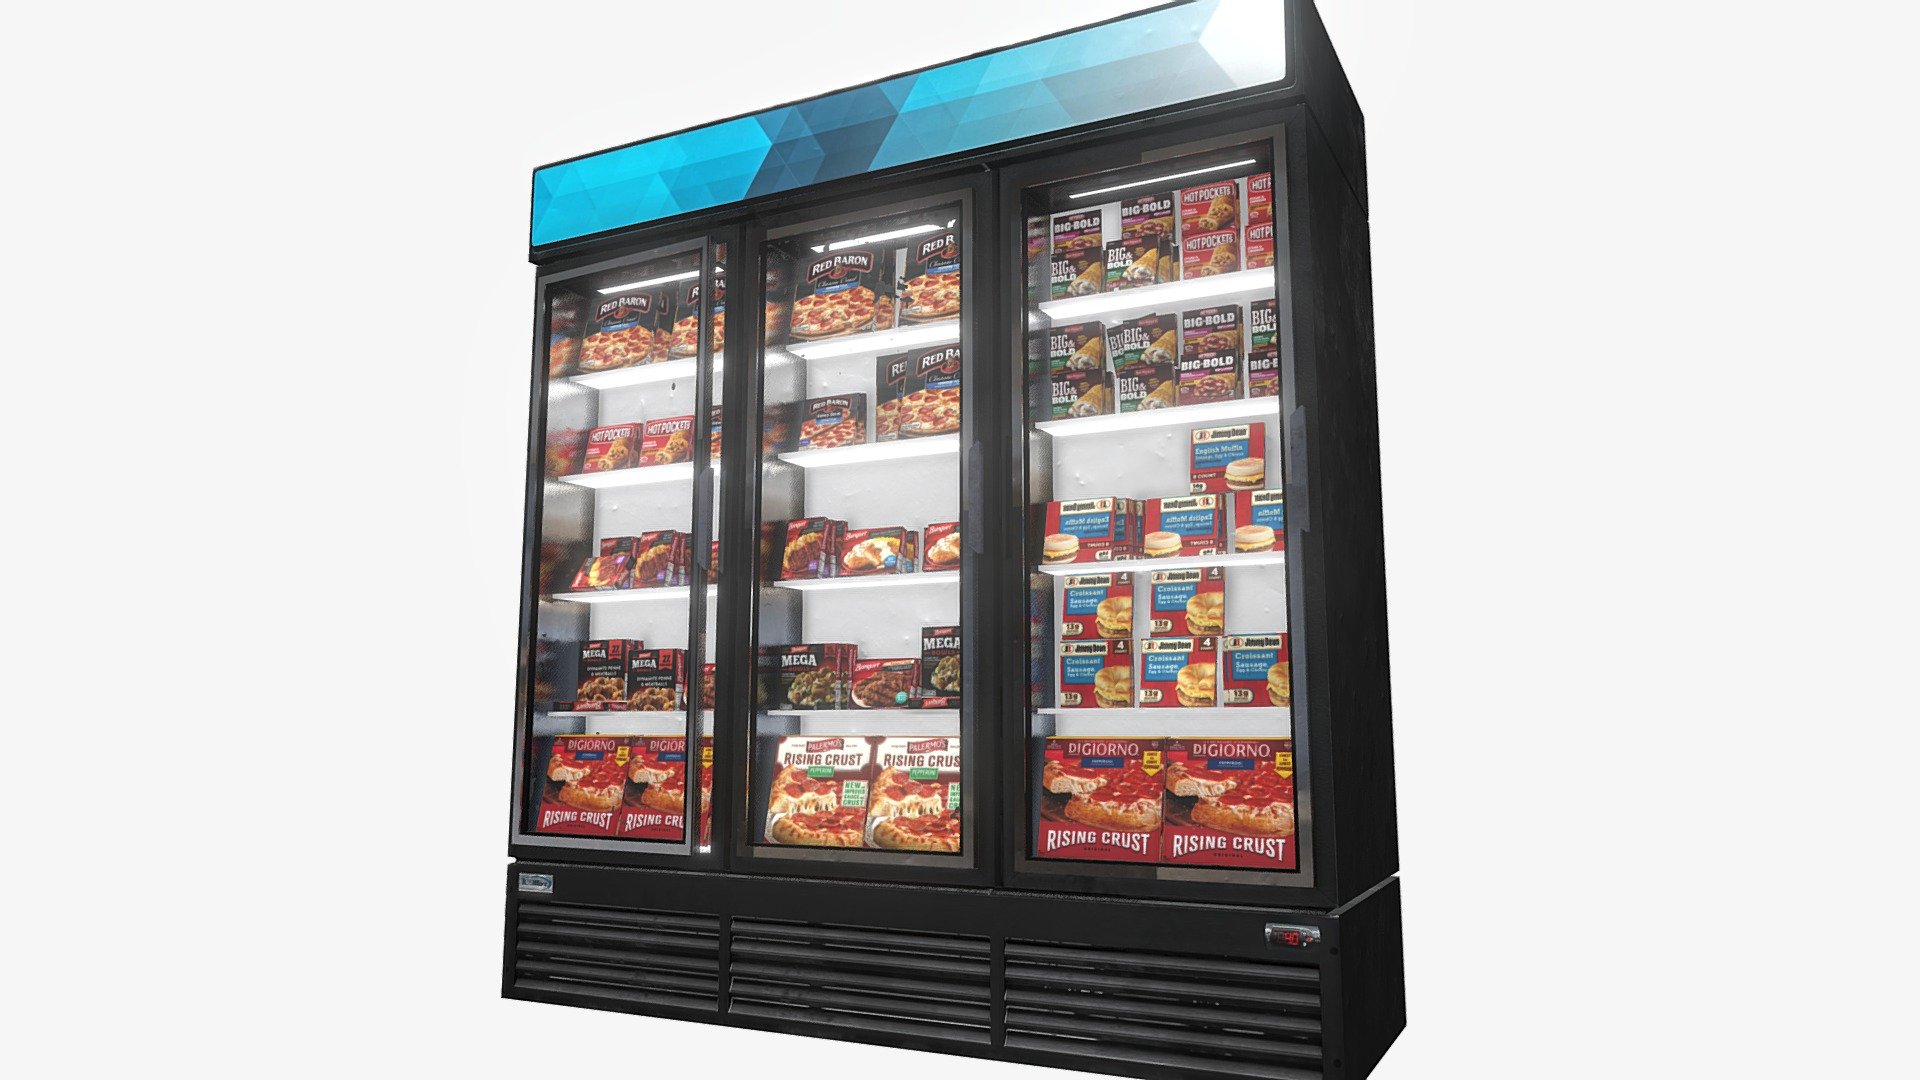 I modeled and textured this Frozen-Food Section style Cooler/Freezer in Blender.
I generated normal-maps for it as well.

This Freezer is Low-Poly and Game-Ready 3d model